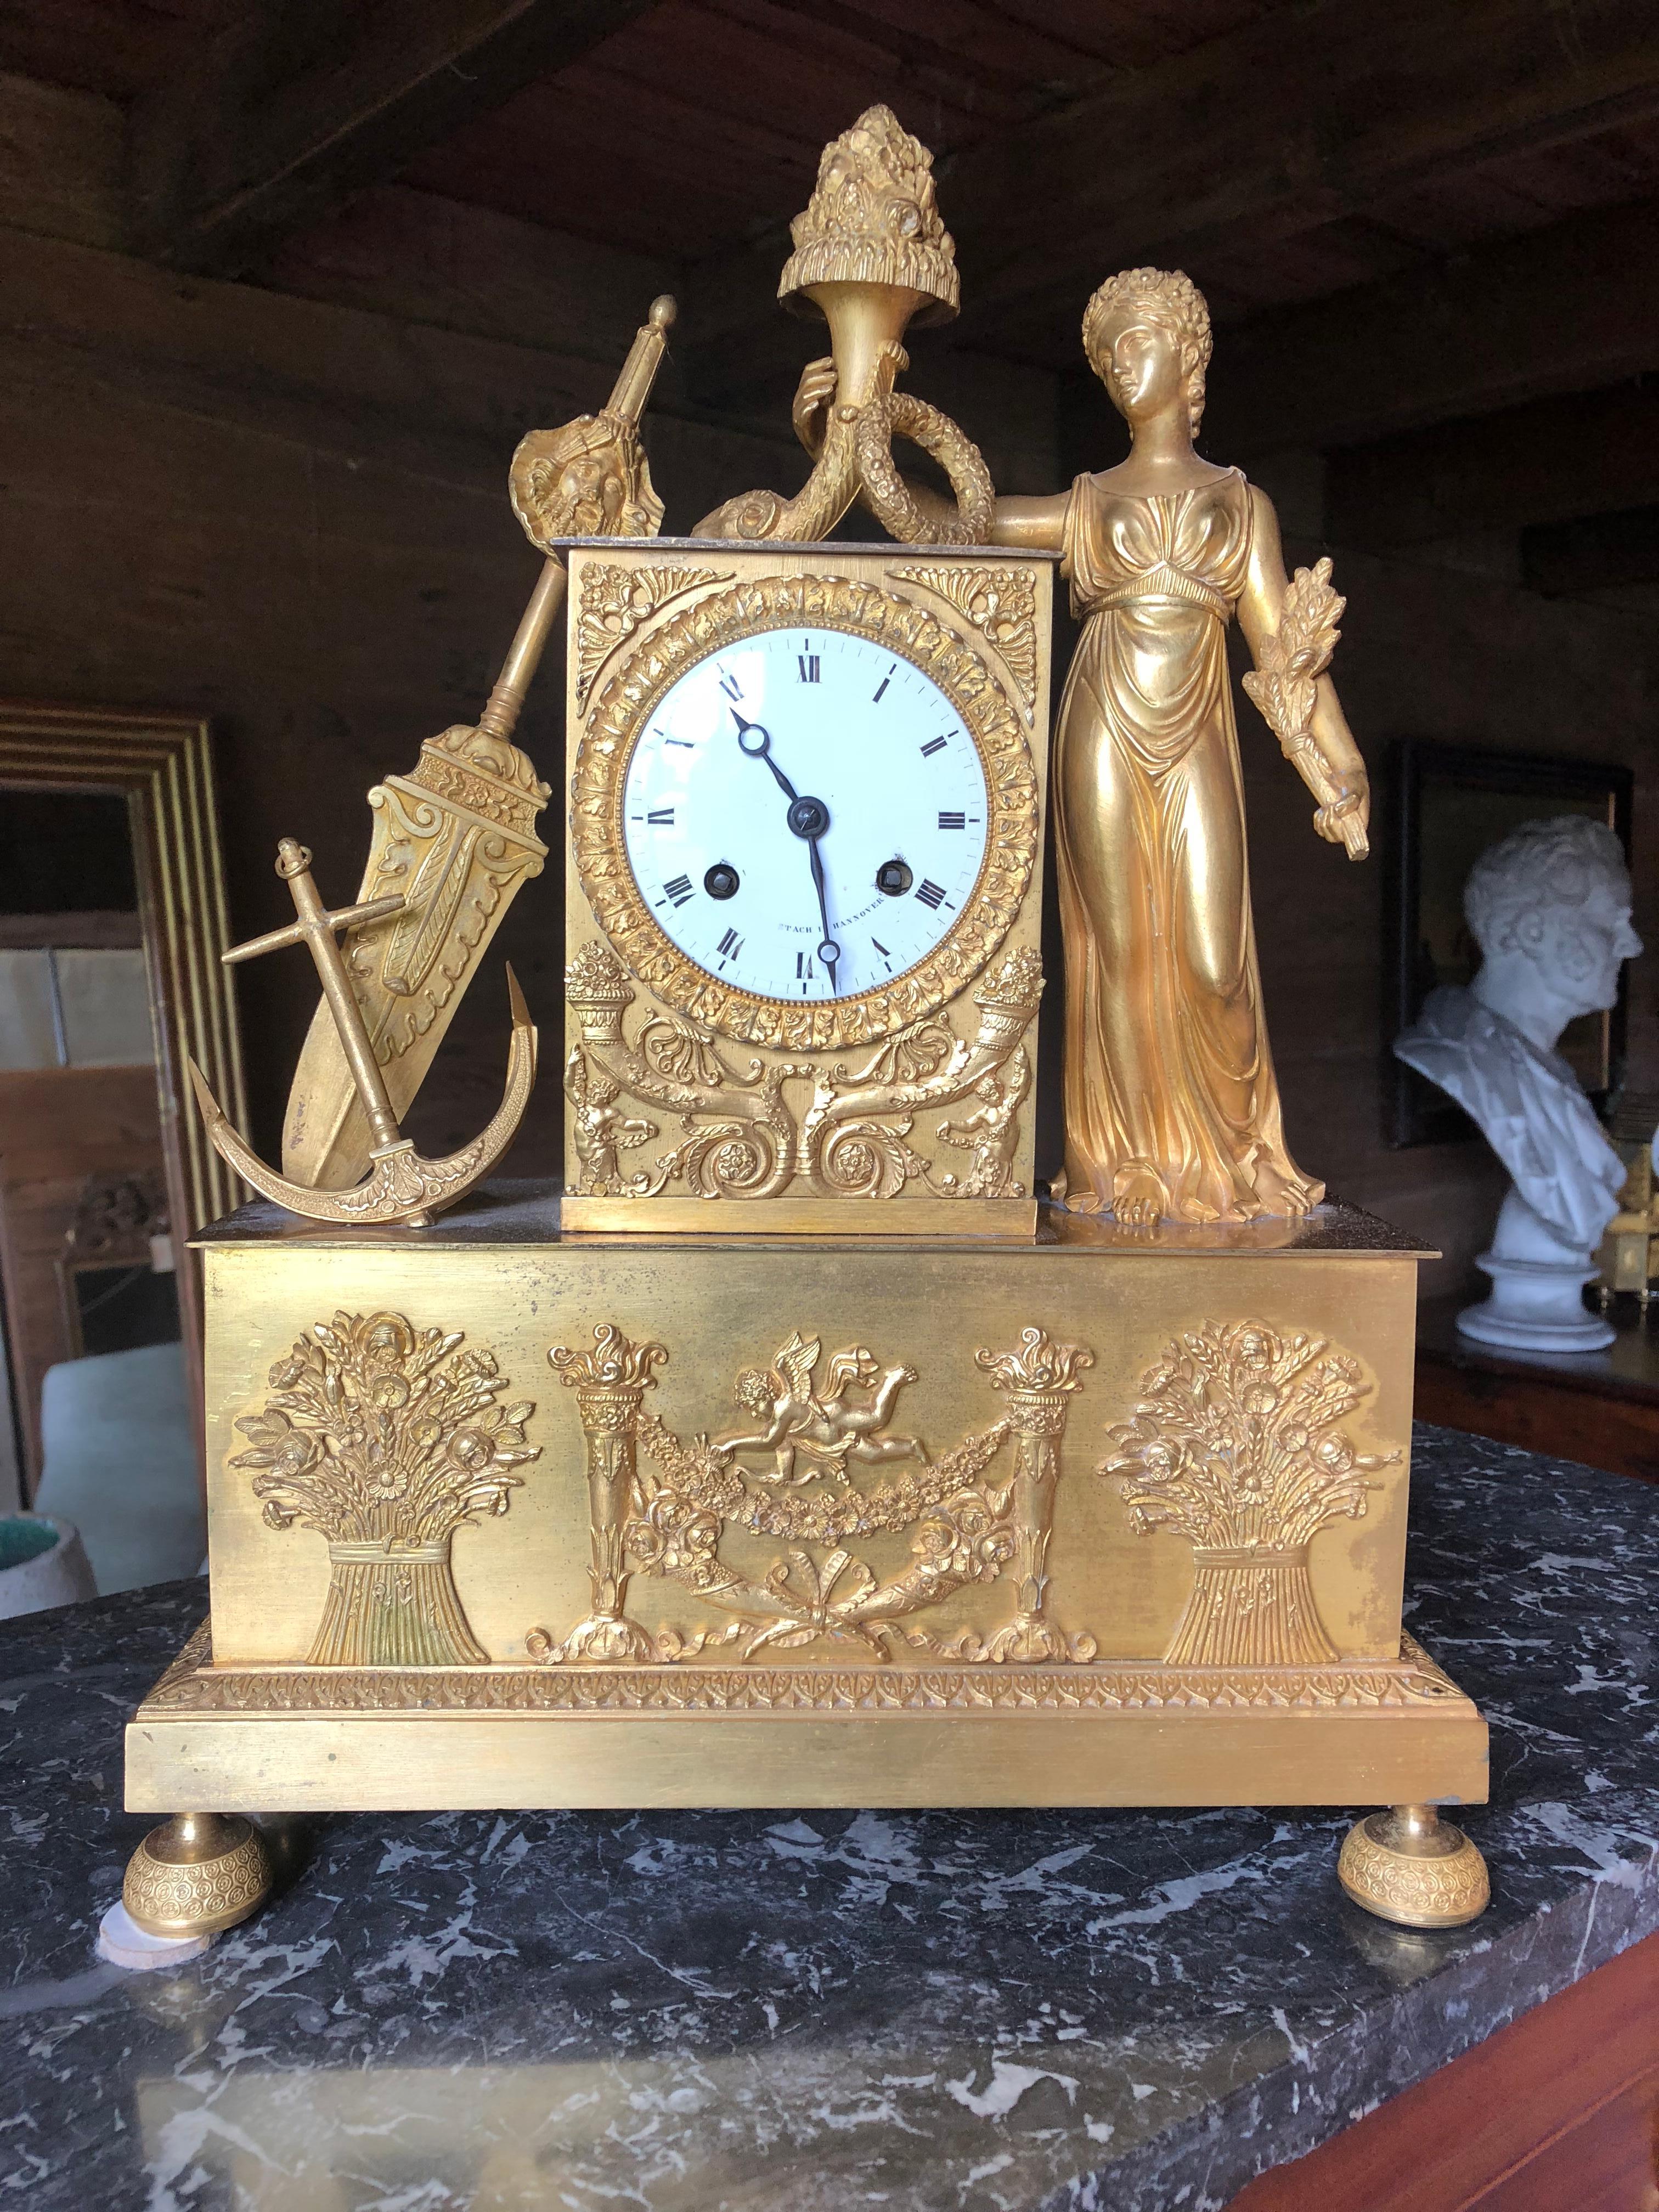 An unusual French figural mantel clock of the early 19th century, in the neoclassical manner, depicting a Maritime theme with woman holding a cornucopia, with a large anchor and sword beside the central clock face. The pedestal has two sheafs of